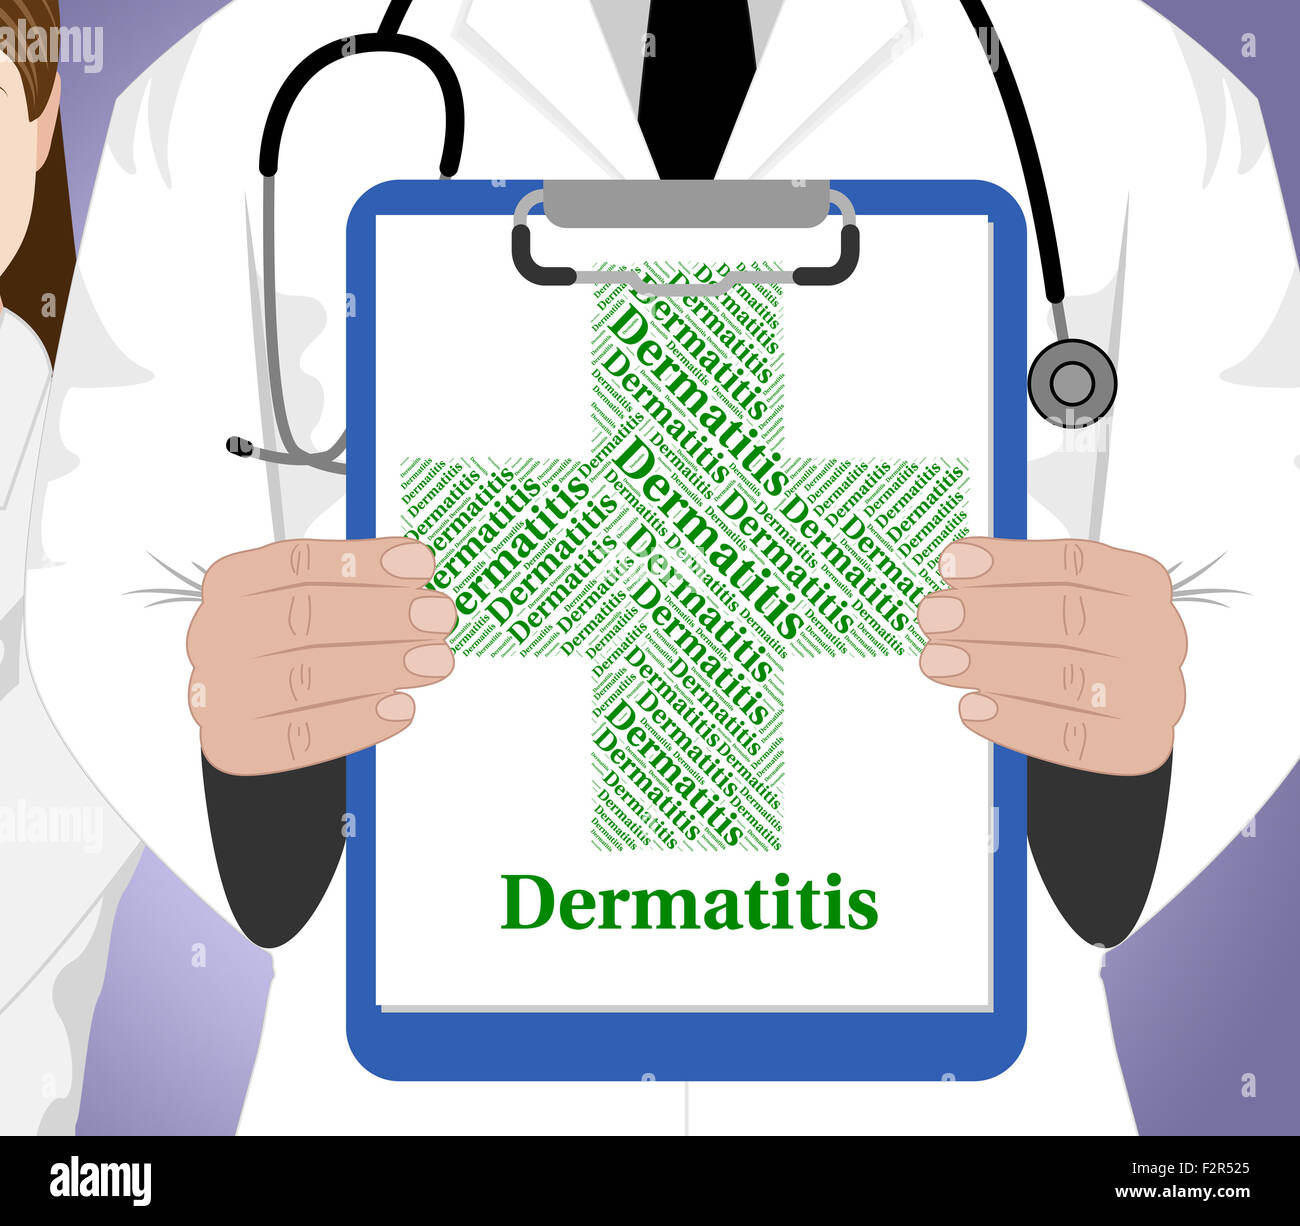 Dermatitis Word Meaning Skin Disease And Malady Stock Photo